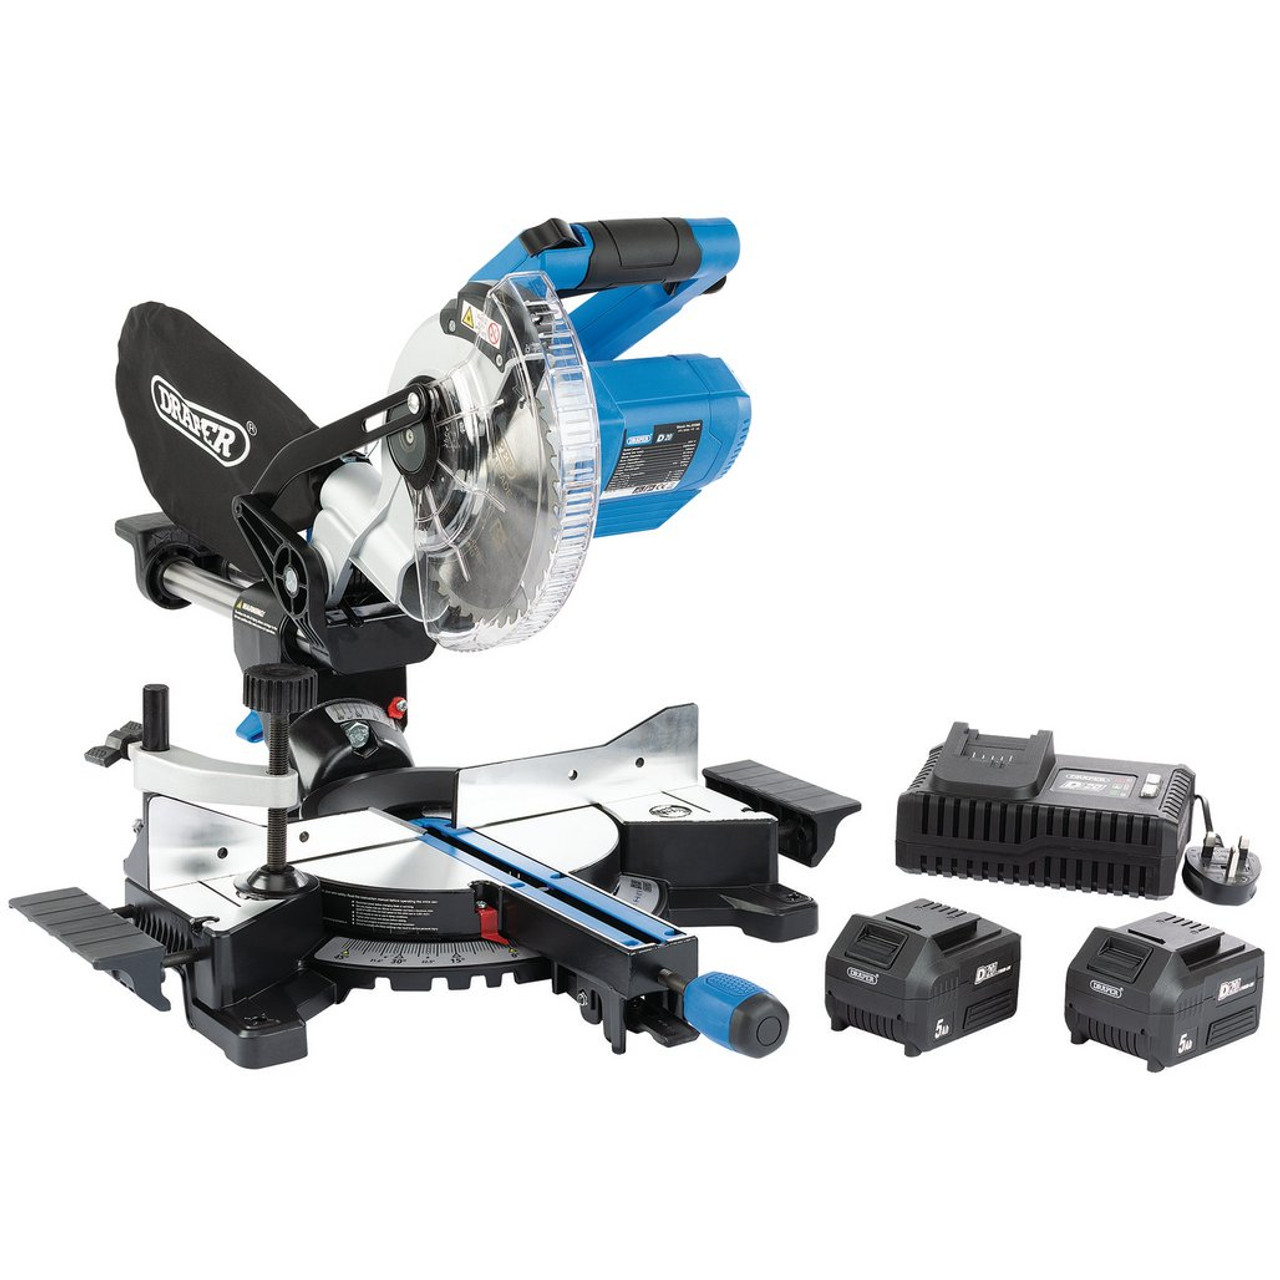 D20 20V Brushless 185mm Sliding Compound Mitre Saw Kit (+2 x 5Ah Batteries  and Charger) (99632) Draper Tools